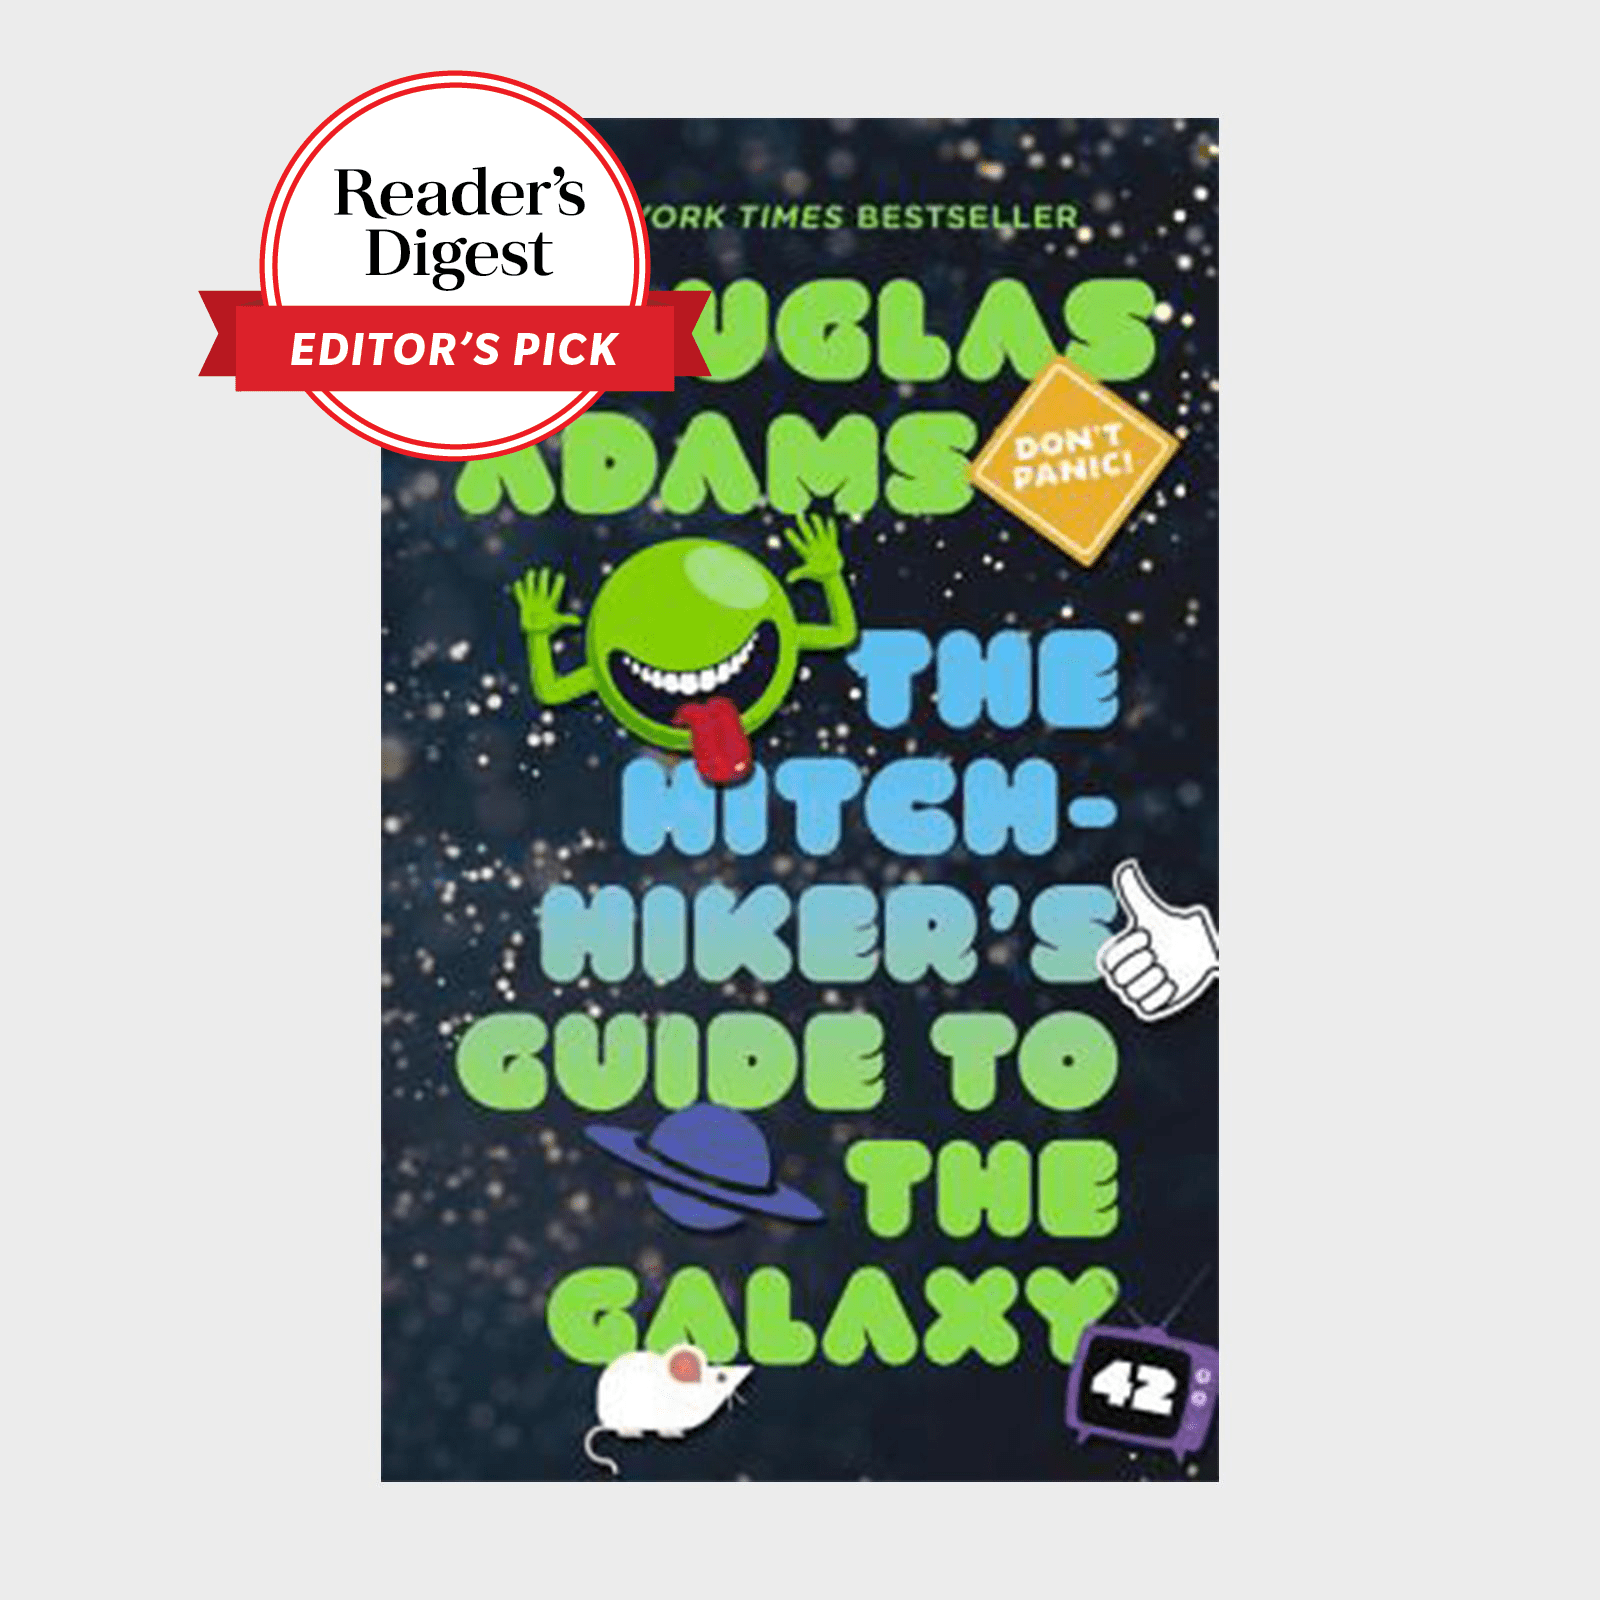 https://www.rd.com/wp-content/uploads/2021/12/the-hitchhiker-s-guide-to-the-galaxy-series-by-douglas-adams-via-bookshop-org-ecomm.png?fit=700%2C700